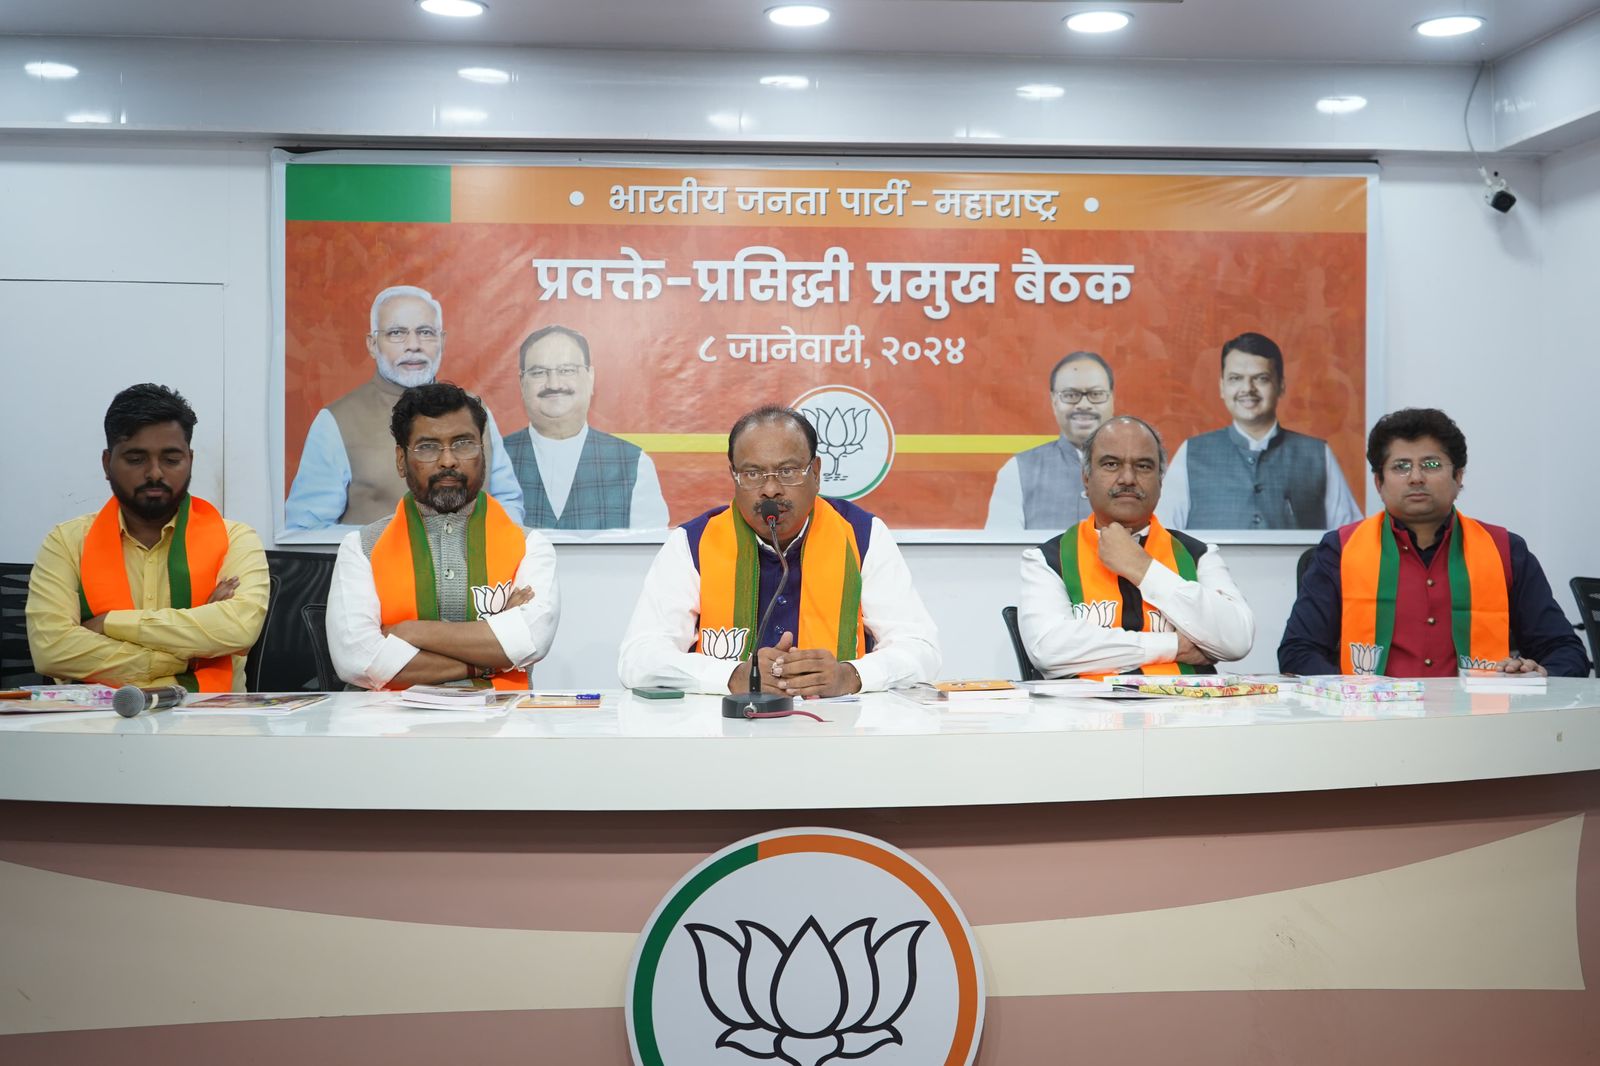 Plan constituency wise to effectively convey the role of the party to the people - BJP state president Chandrasekhar Bawankule